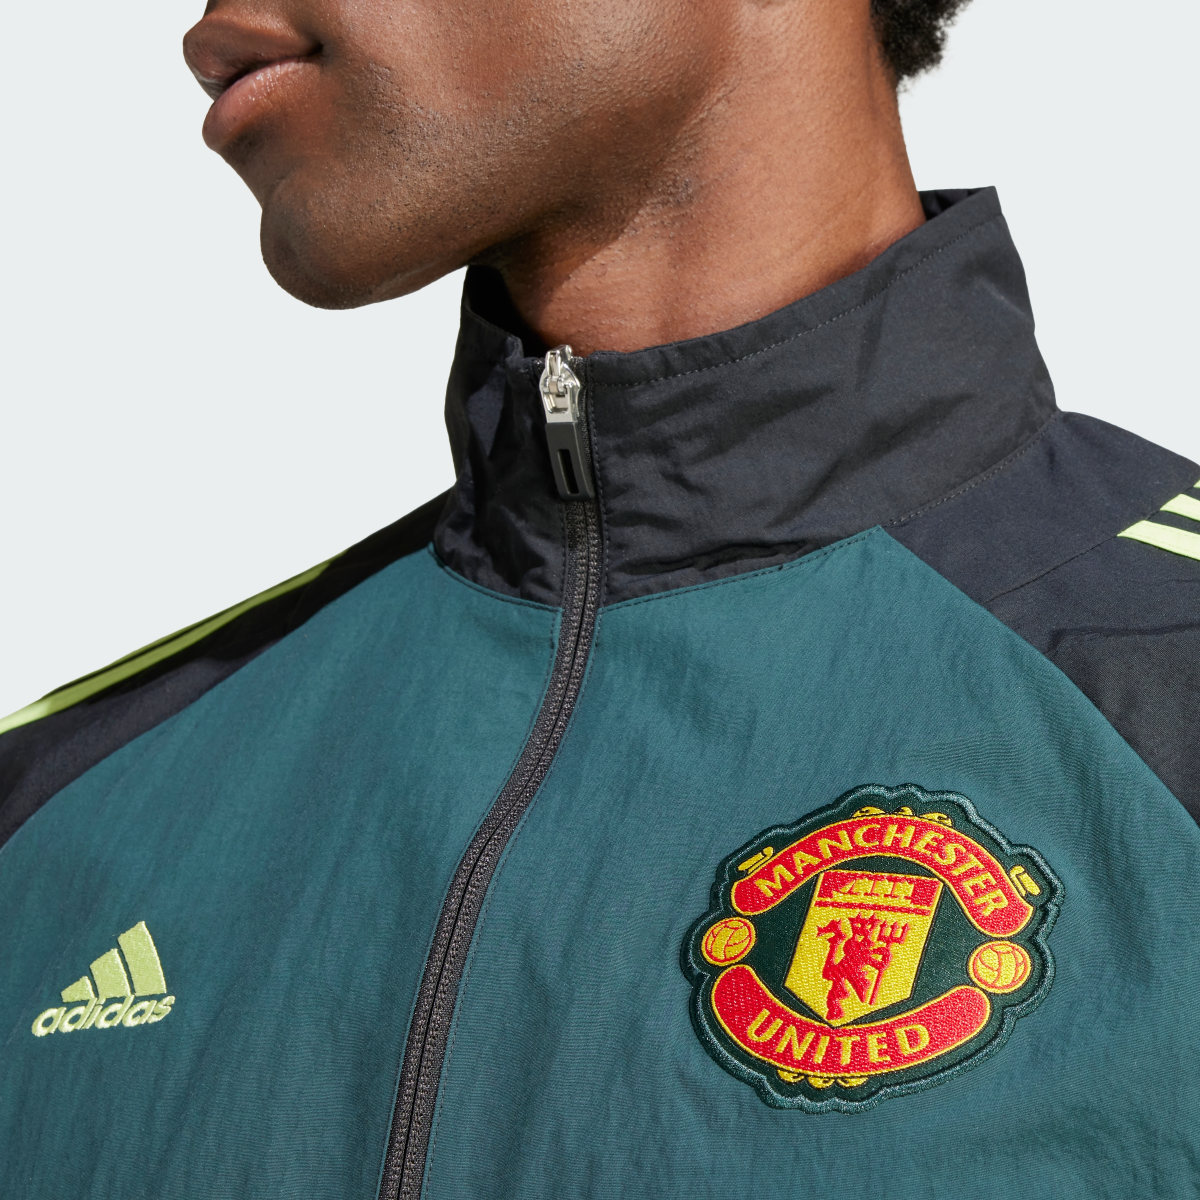 Adidas Manchester United Woven Track Top. 8